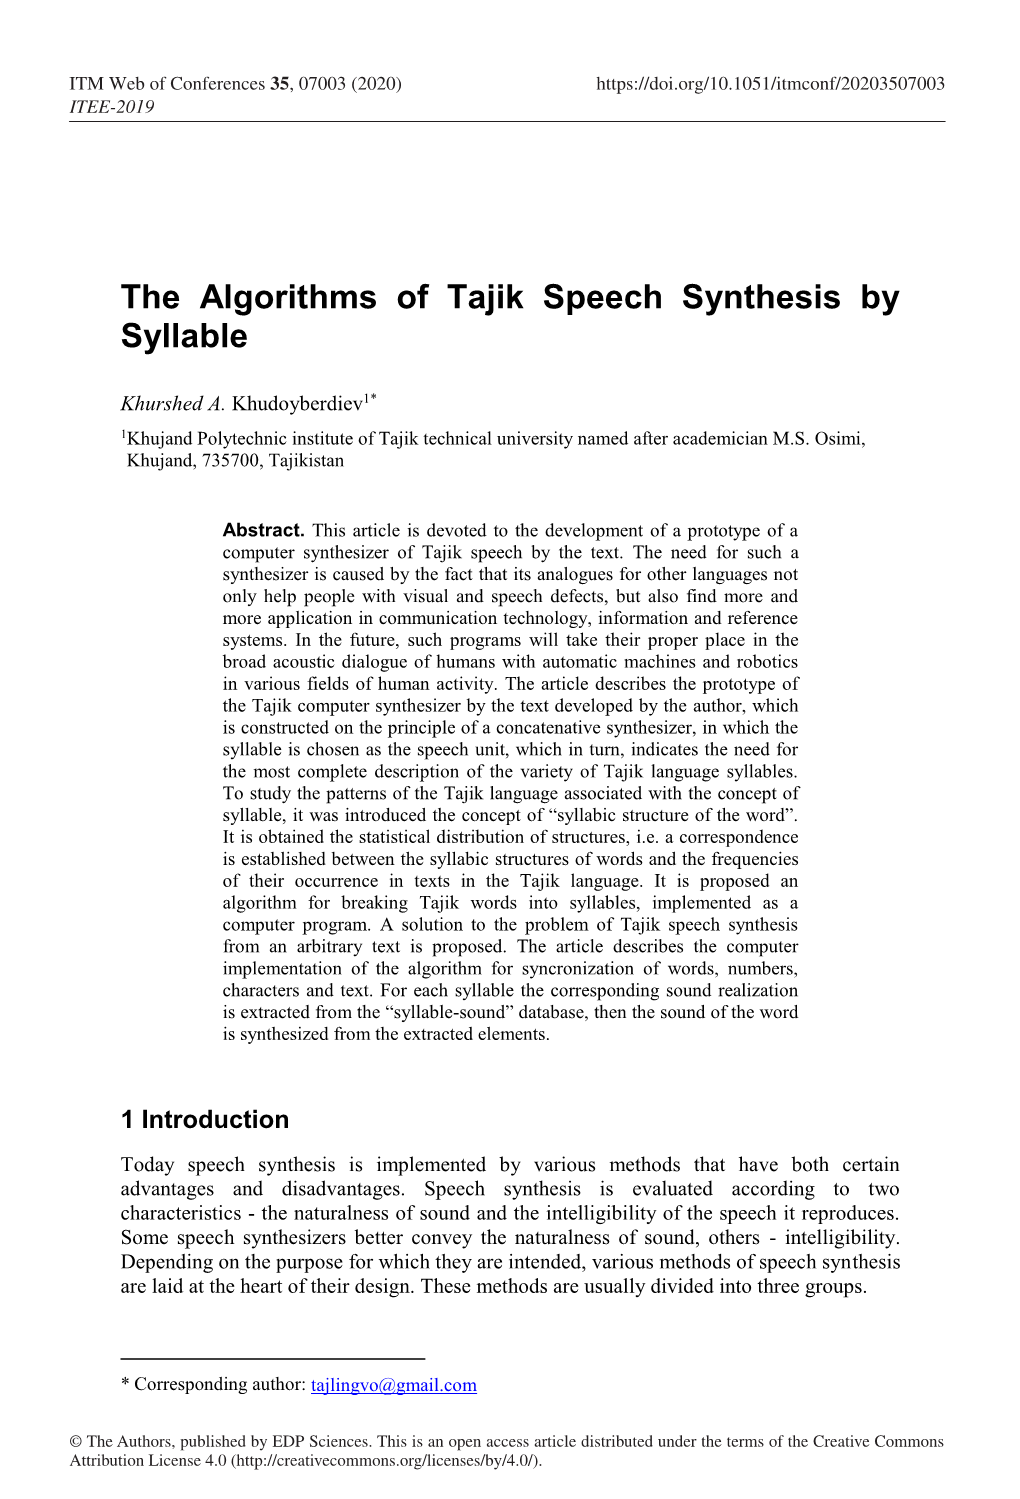 The Algorithms of Tajik Speech Synthesis by Syllable